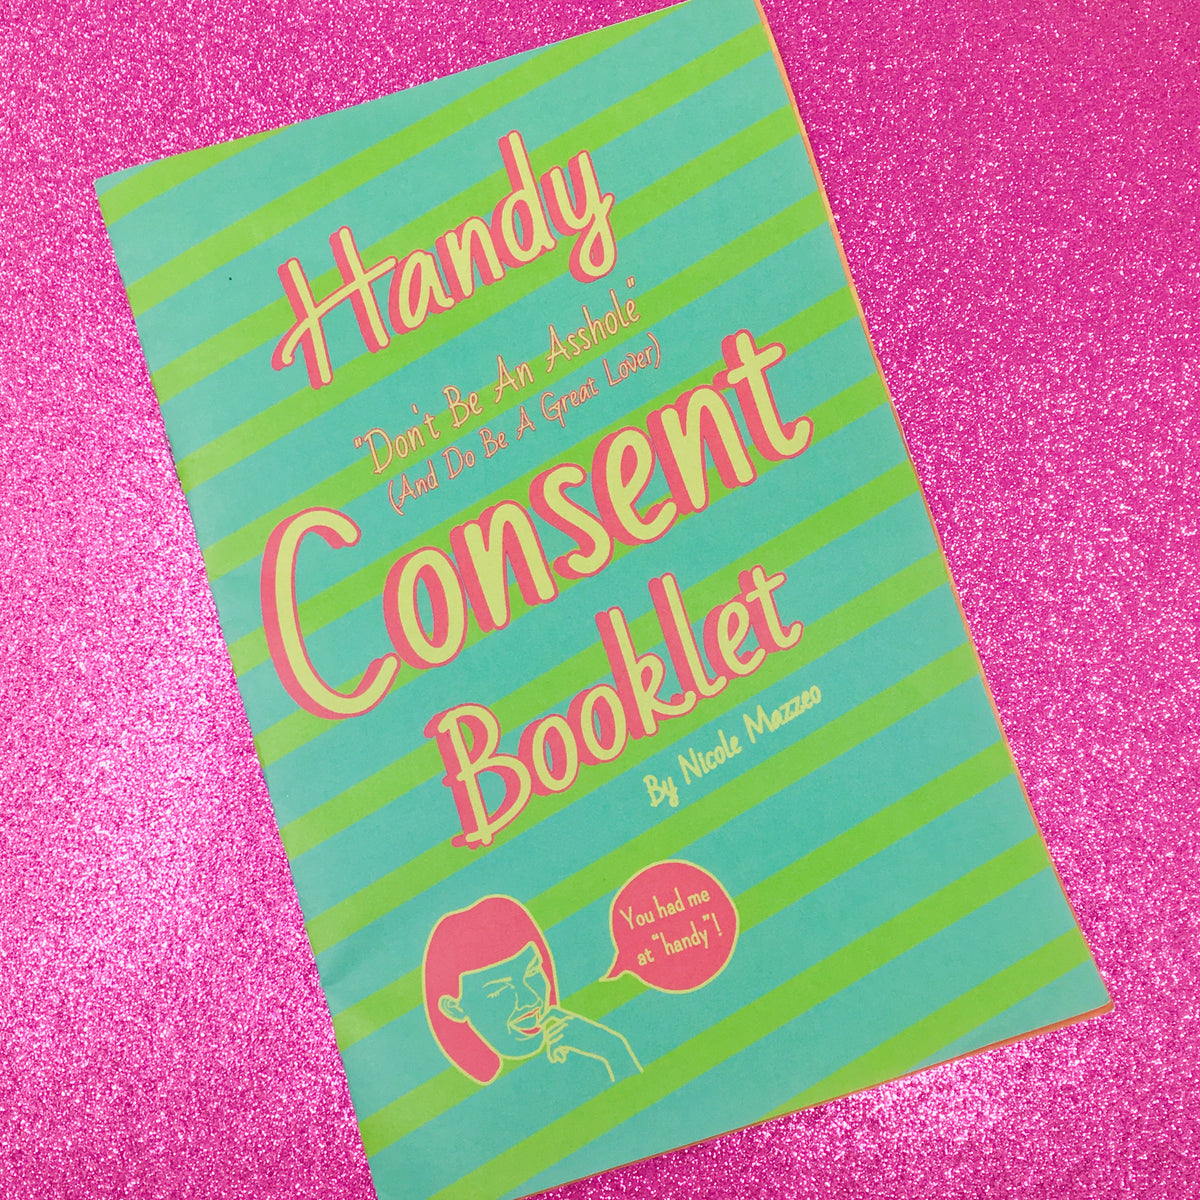 Handy Consent Booklet